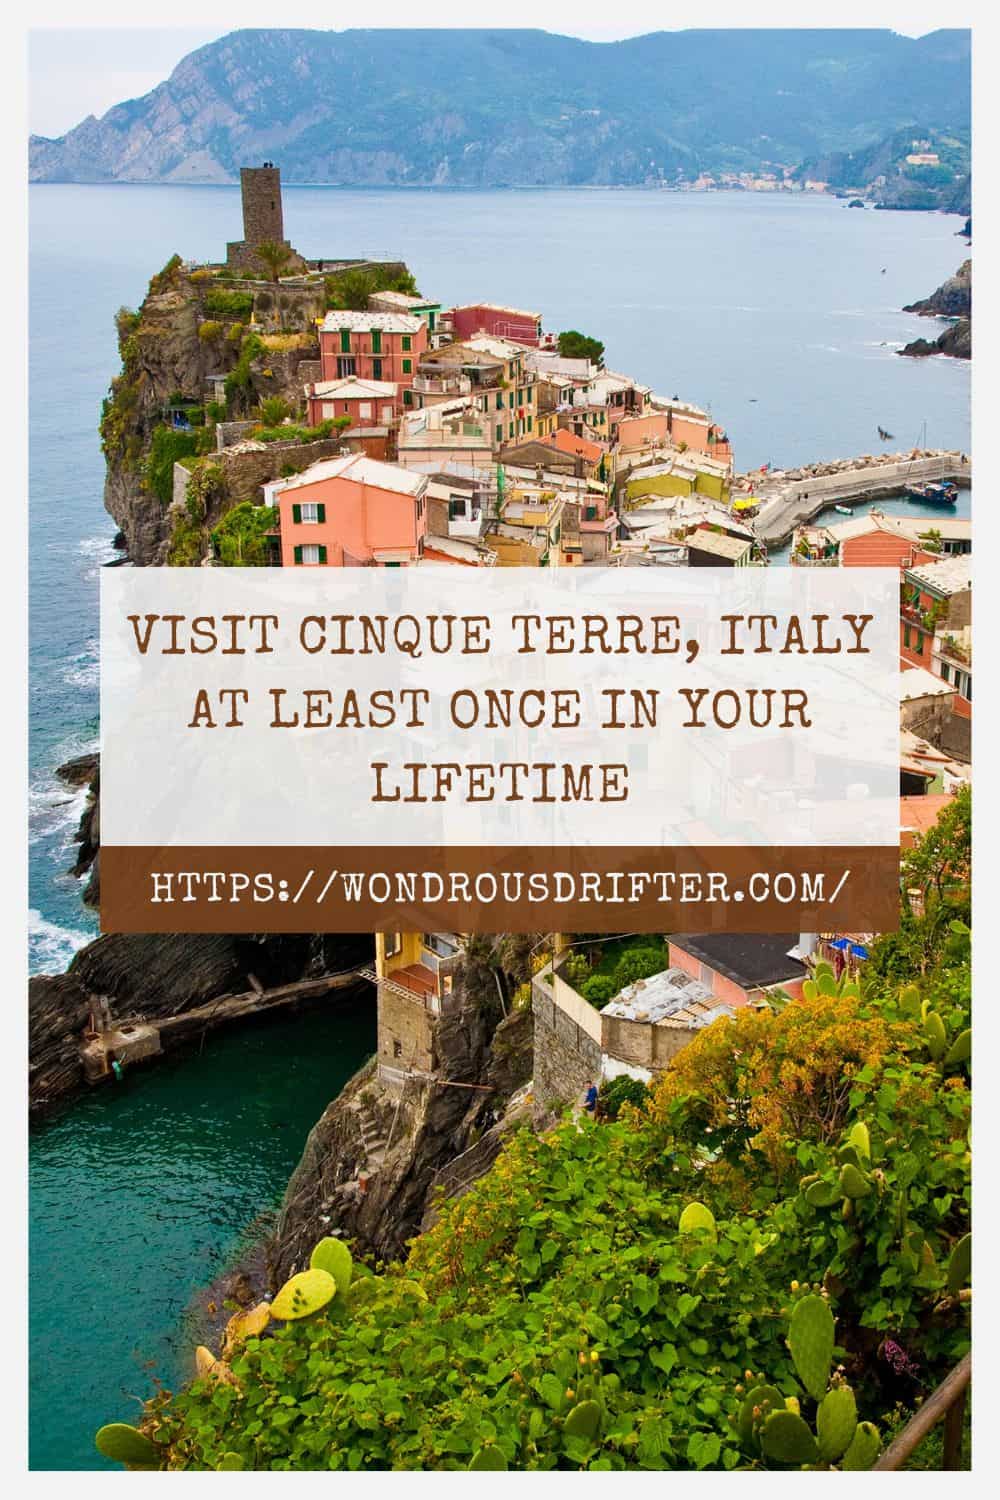 Visit Cinque Terre Italy at least once in your lifetime